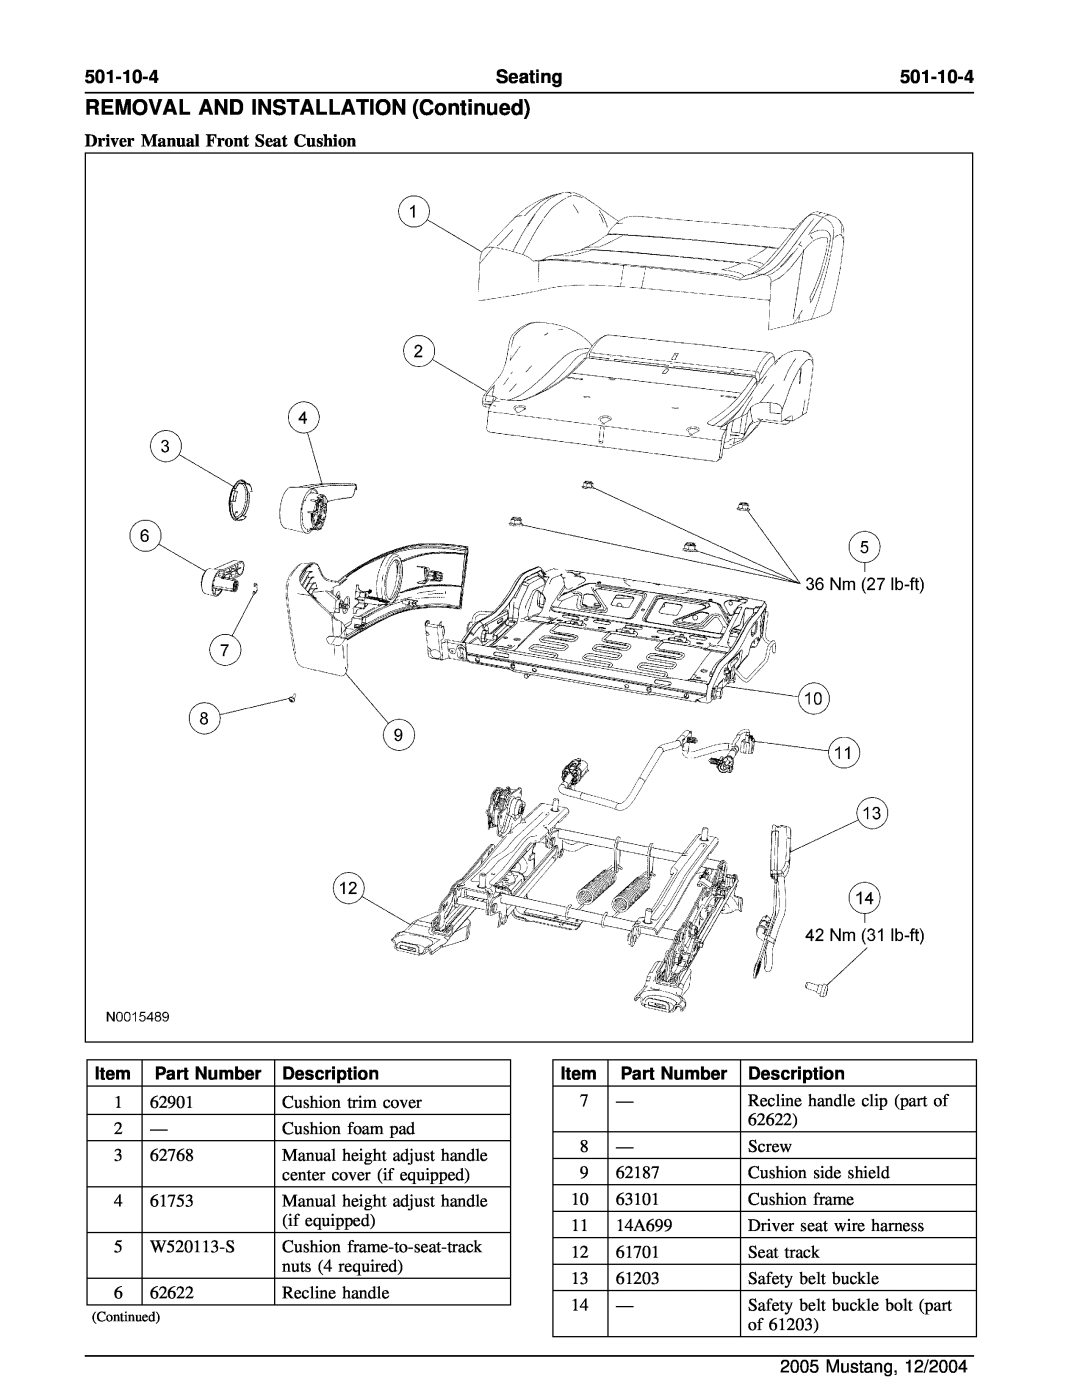 Ford 501-10-1 manual 501-10-4, Driver Manual Front Seat Cushion, REMOVAL AND INSTALLATION Continued, Seating, Part Number 